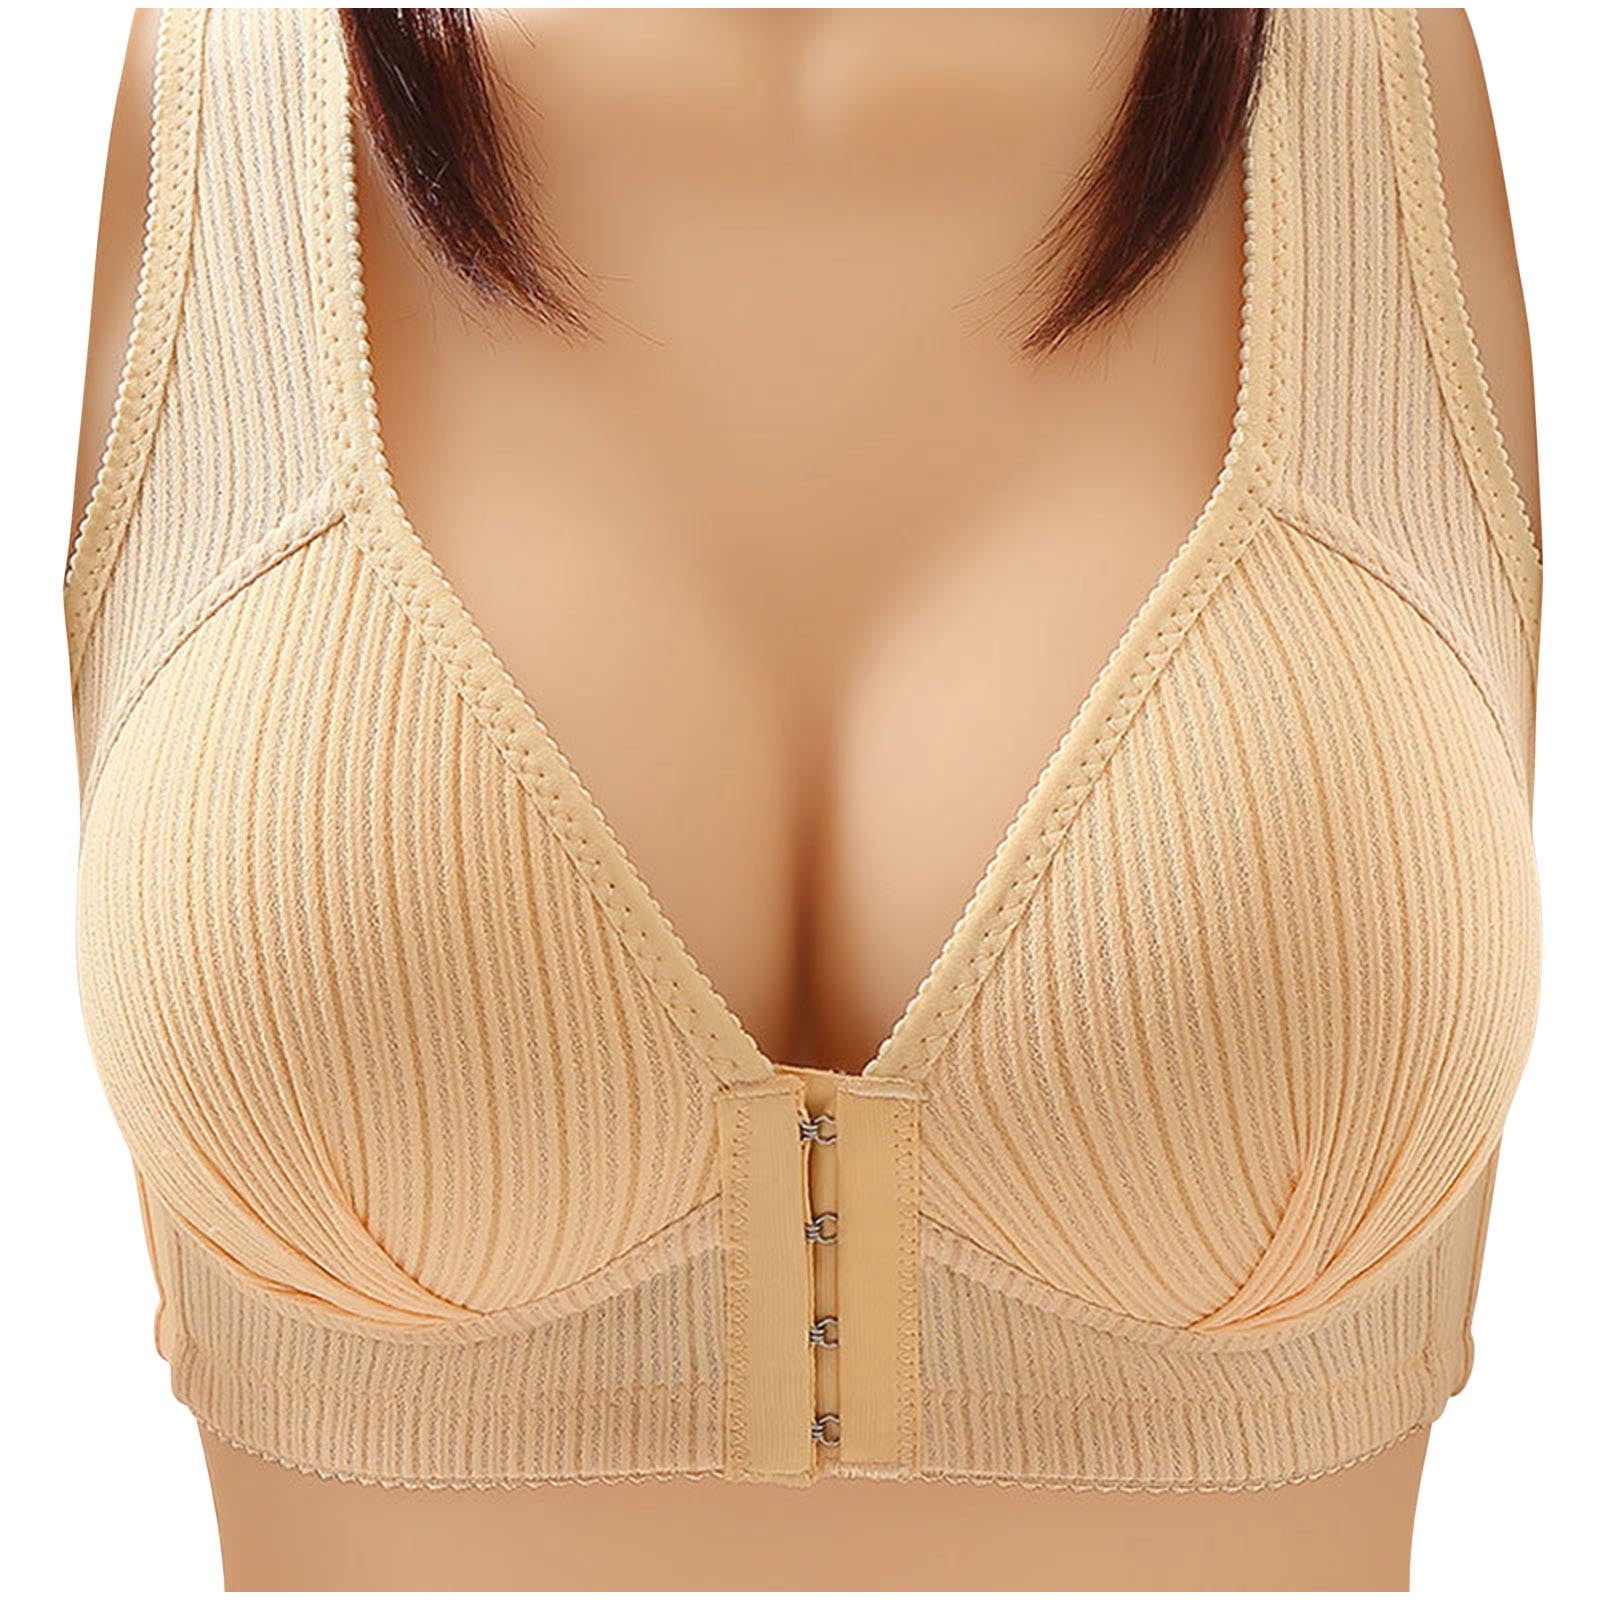 RYRJJ Front Snap Closure Everyday Bras for Women Builtup Sports